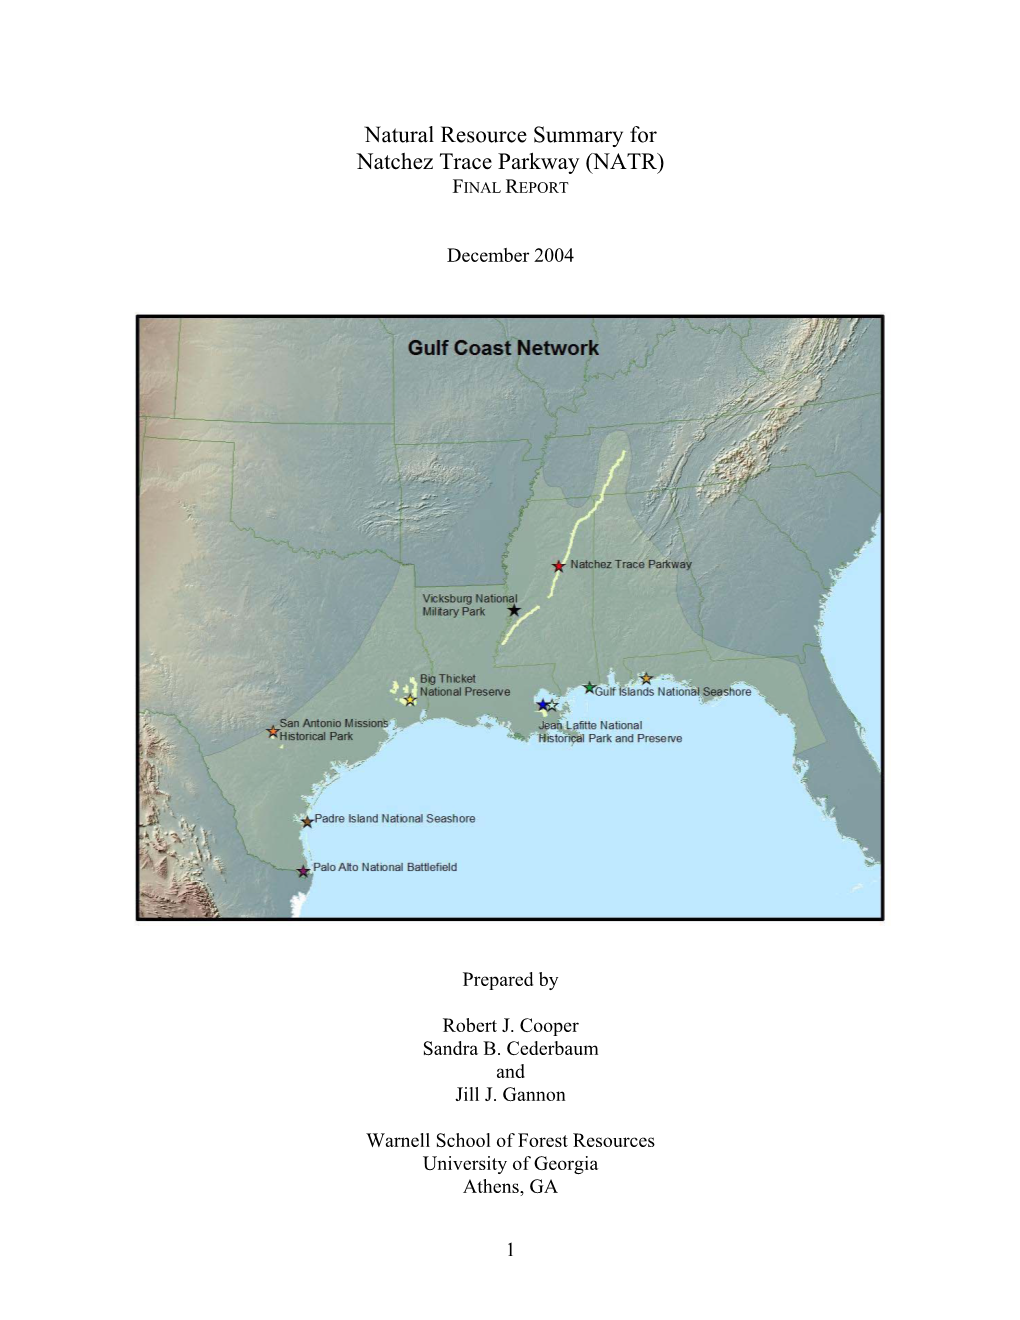 Natural Resource Summary for Natchez Trace Parkway (NATR) FINAL REPORT